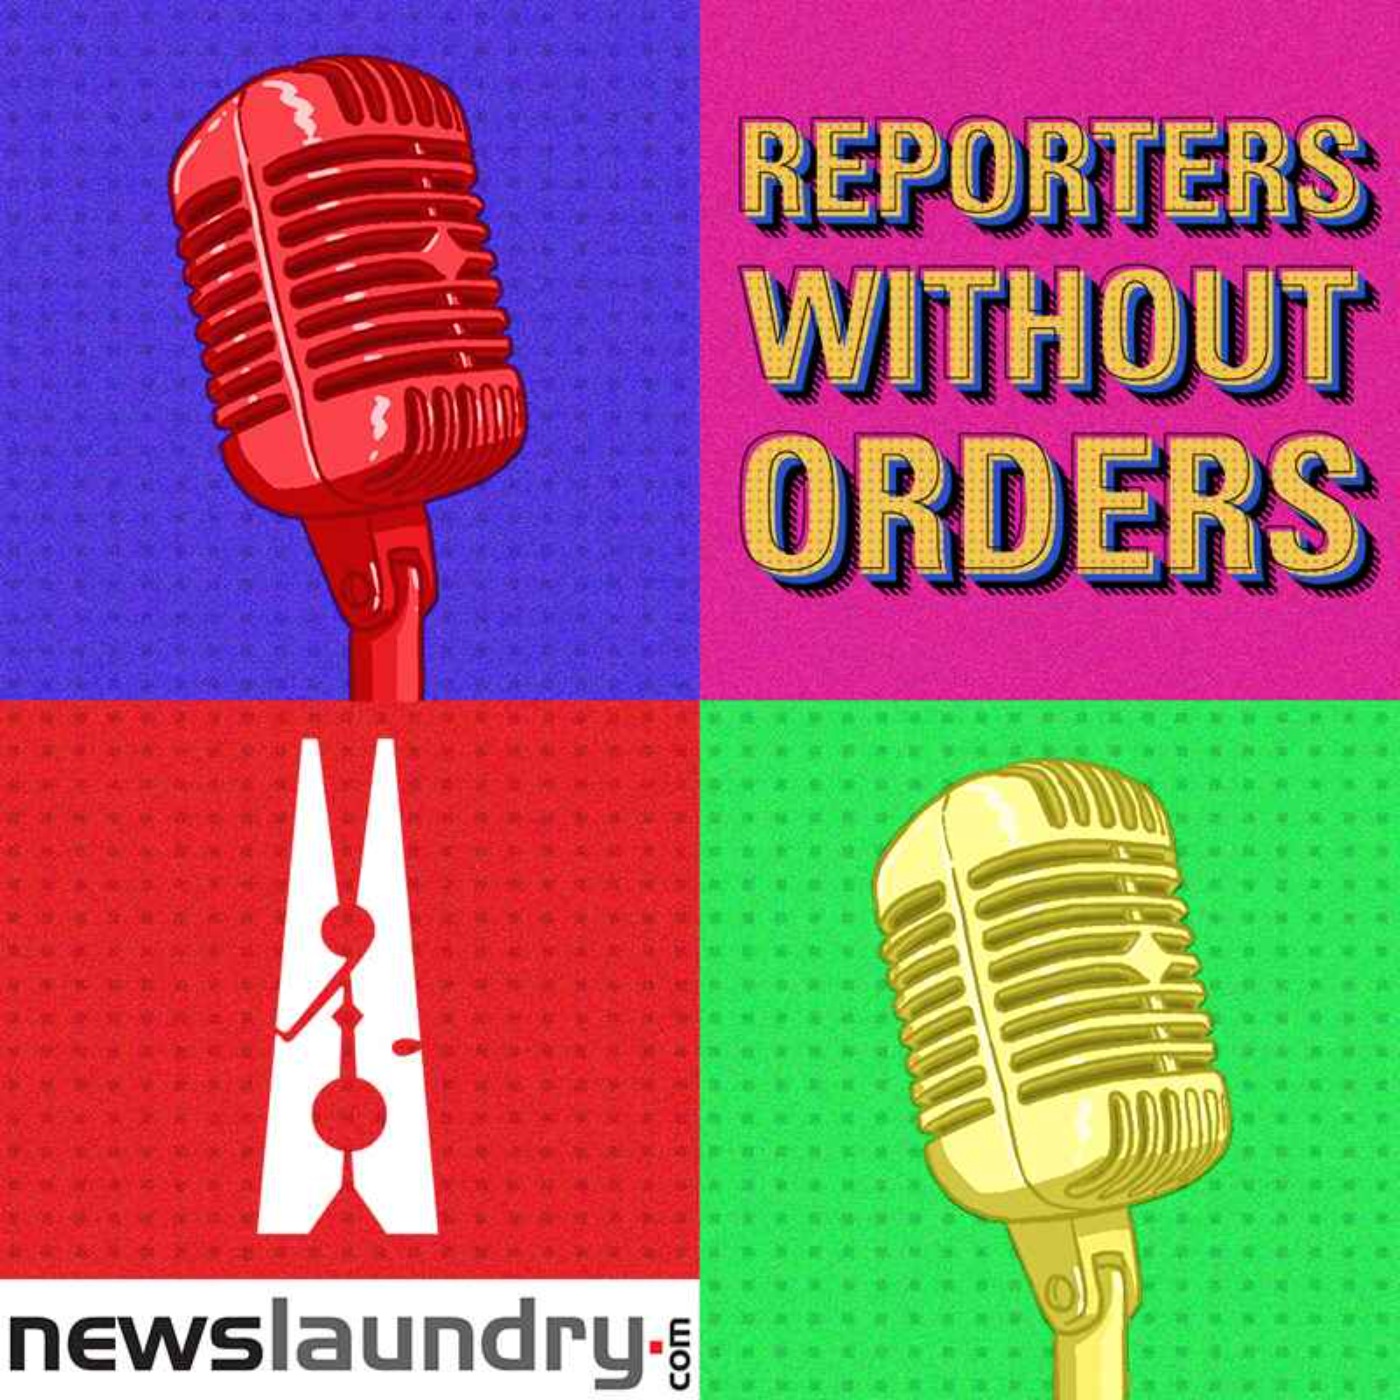 Reporters Without Orders Ep 316: Aurobindo Pharma’s electoral bonds, Kejriwal’s arrest